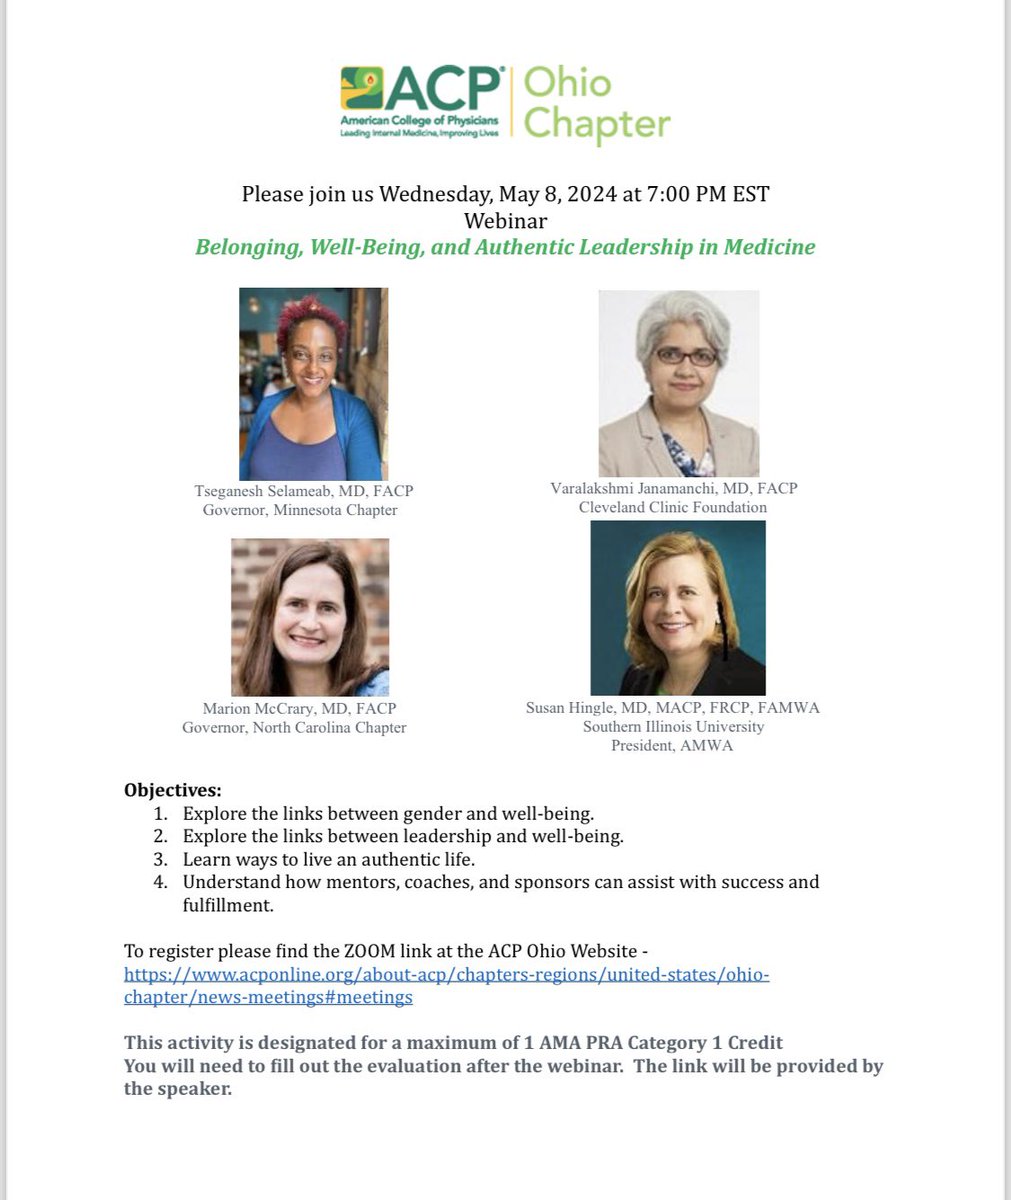 Please join us Wednesday, May 8, 2024 at 7:00 PM EST Webinar Belonging, Well-Being, and Authentic Leadership in Medicine Register at the ACP Ohio Website -acponline.org/about-acp/chap… 1 AMA PRA Category 1 Credit @ACPIMPhysicians @SusanHingle @marionmccrarymd @Tseganesh_MD…